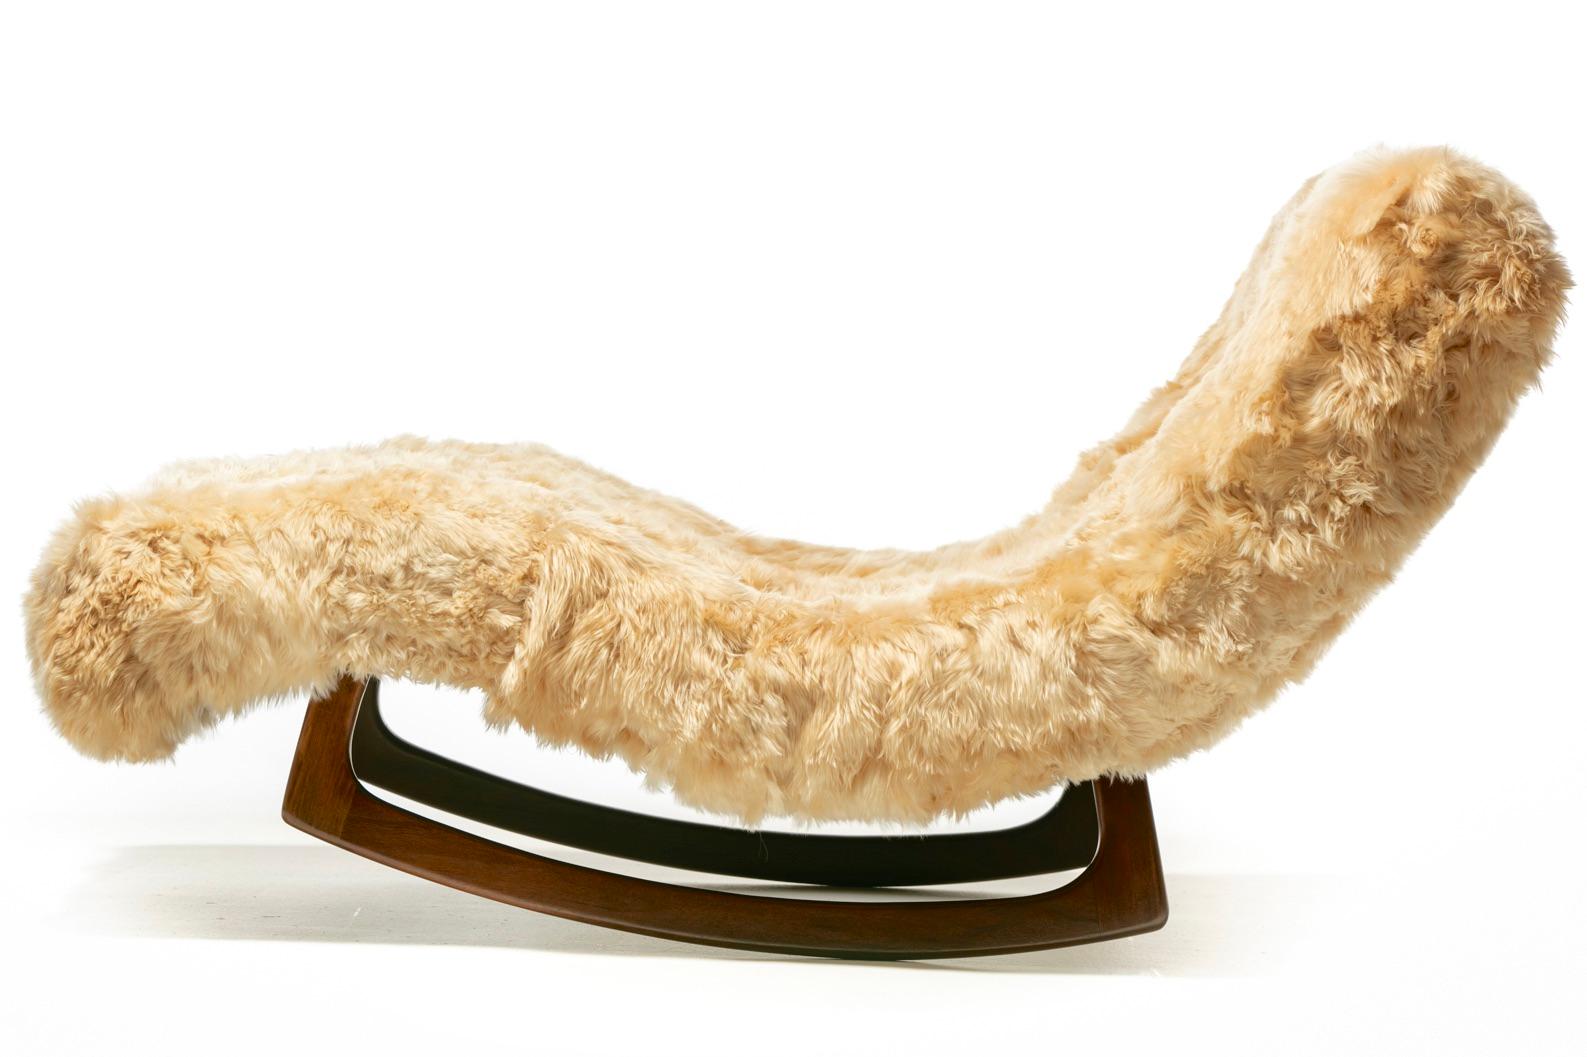 Mid-20th Century Adrian Pearsall Chaise Lounge Rocker Newly Upholstered in Soft Peruvian Alpaca For Sale